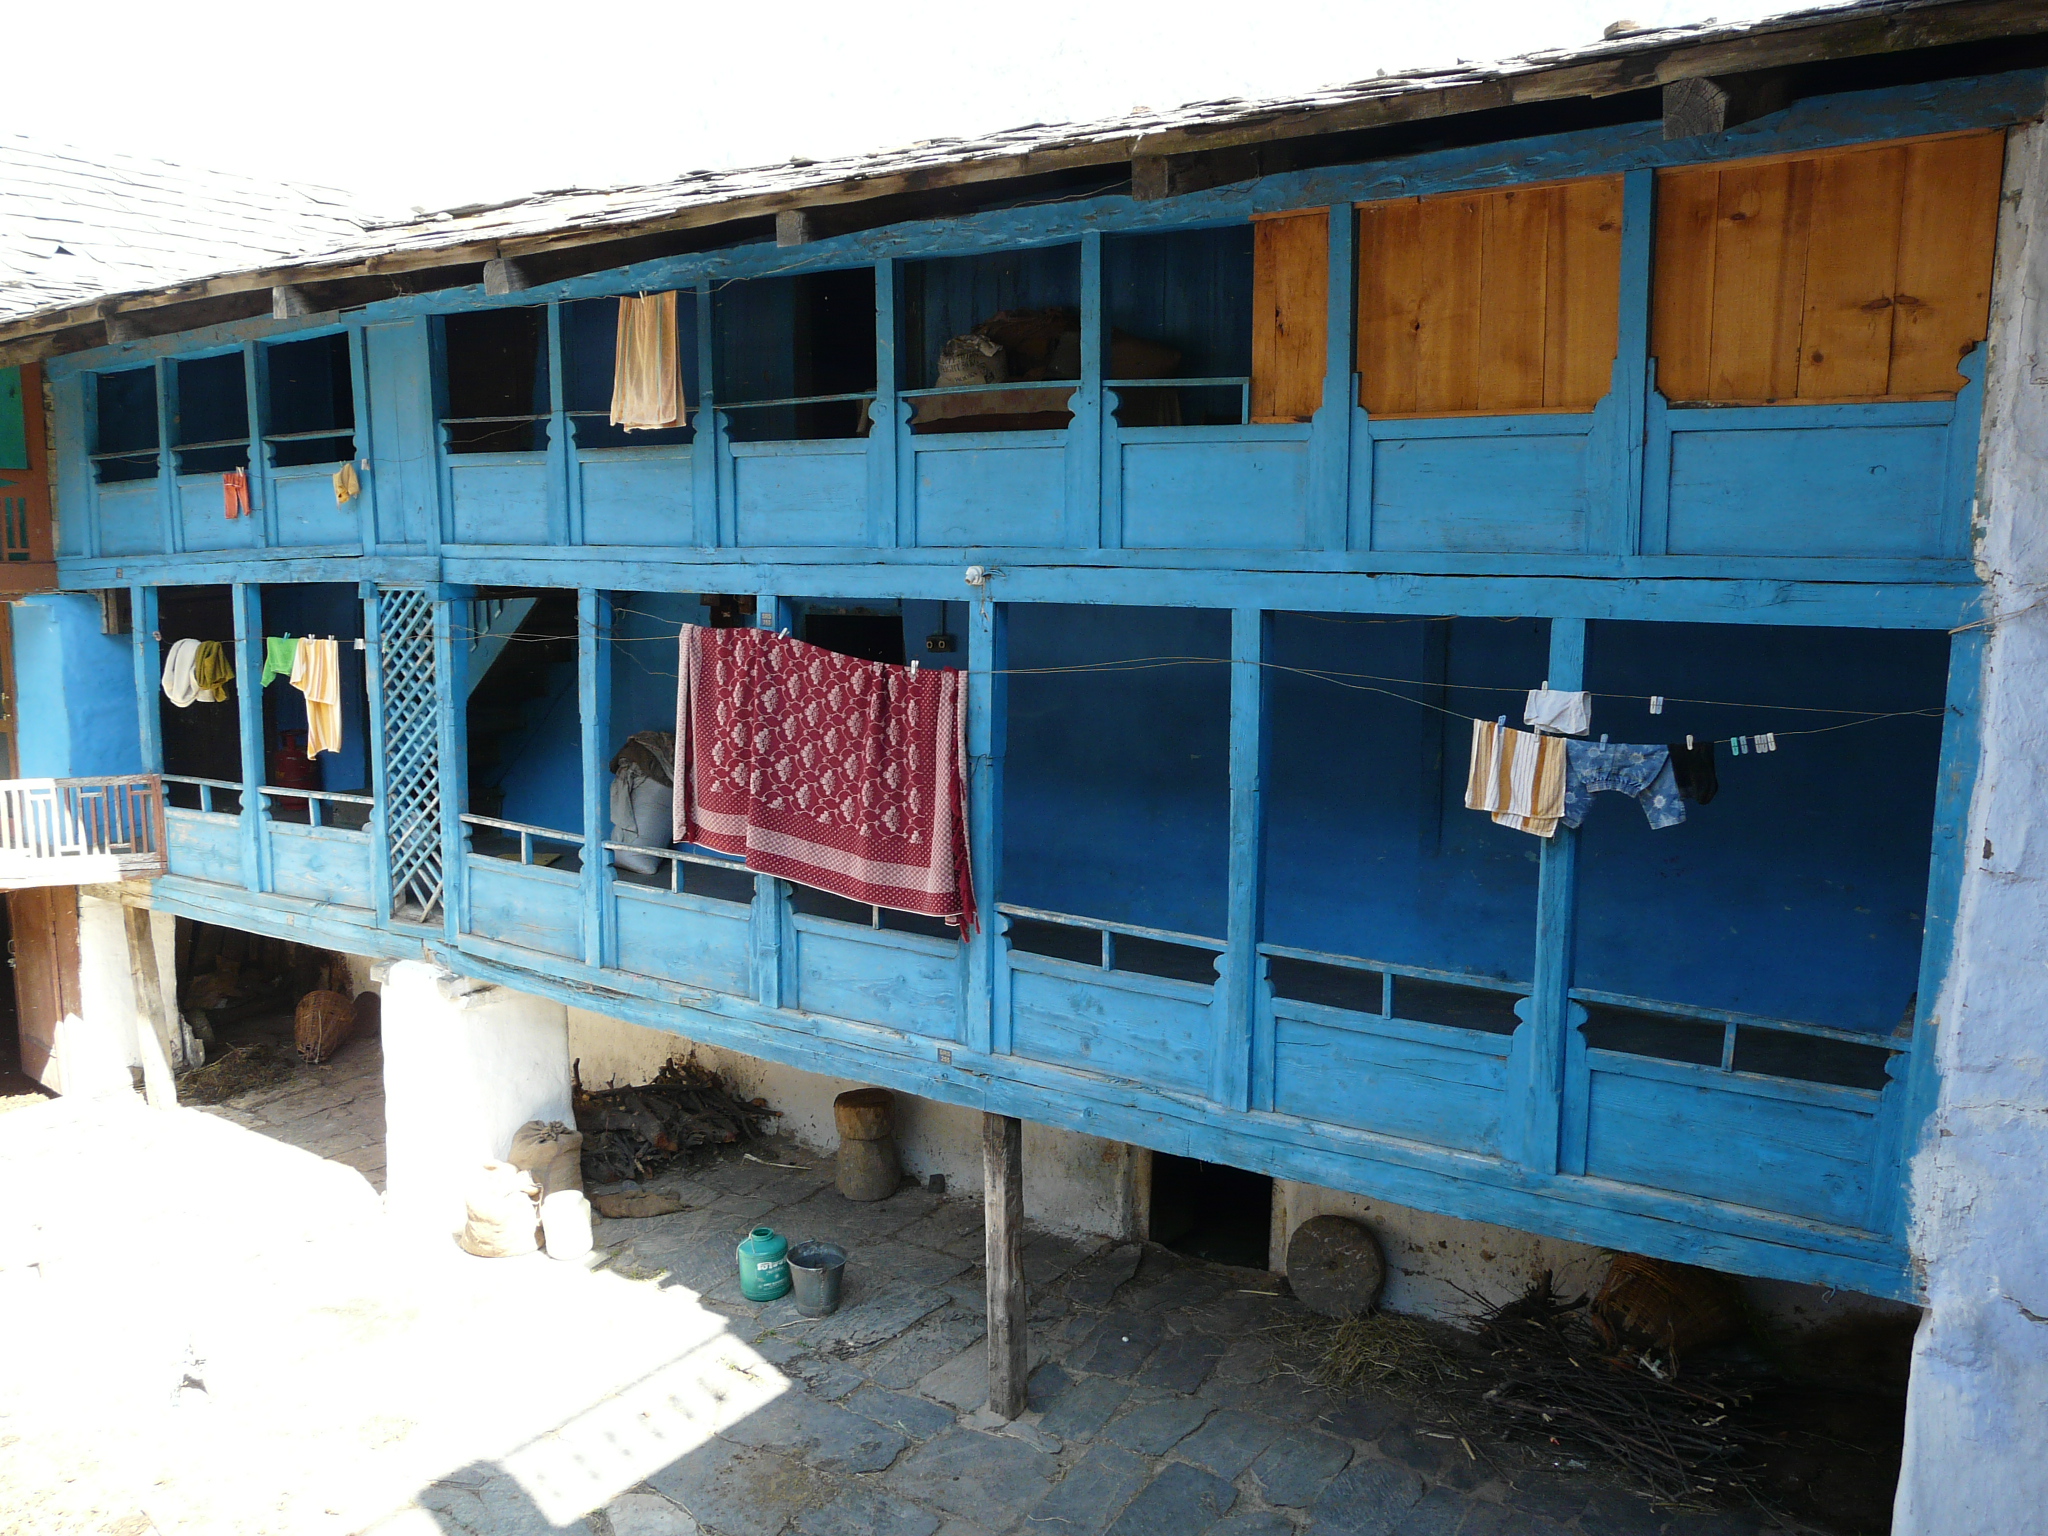 a blue building with lots of windows and cloths hung on the balcony